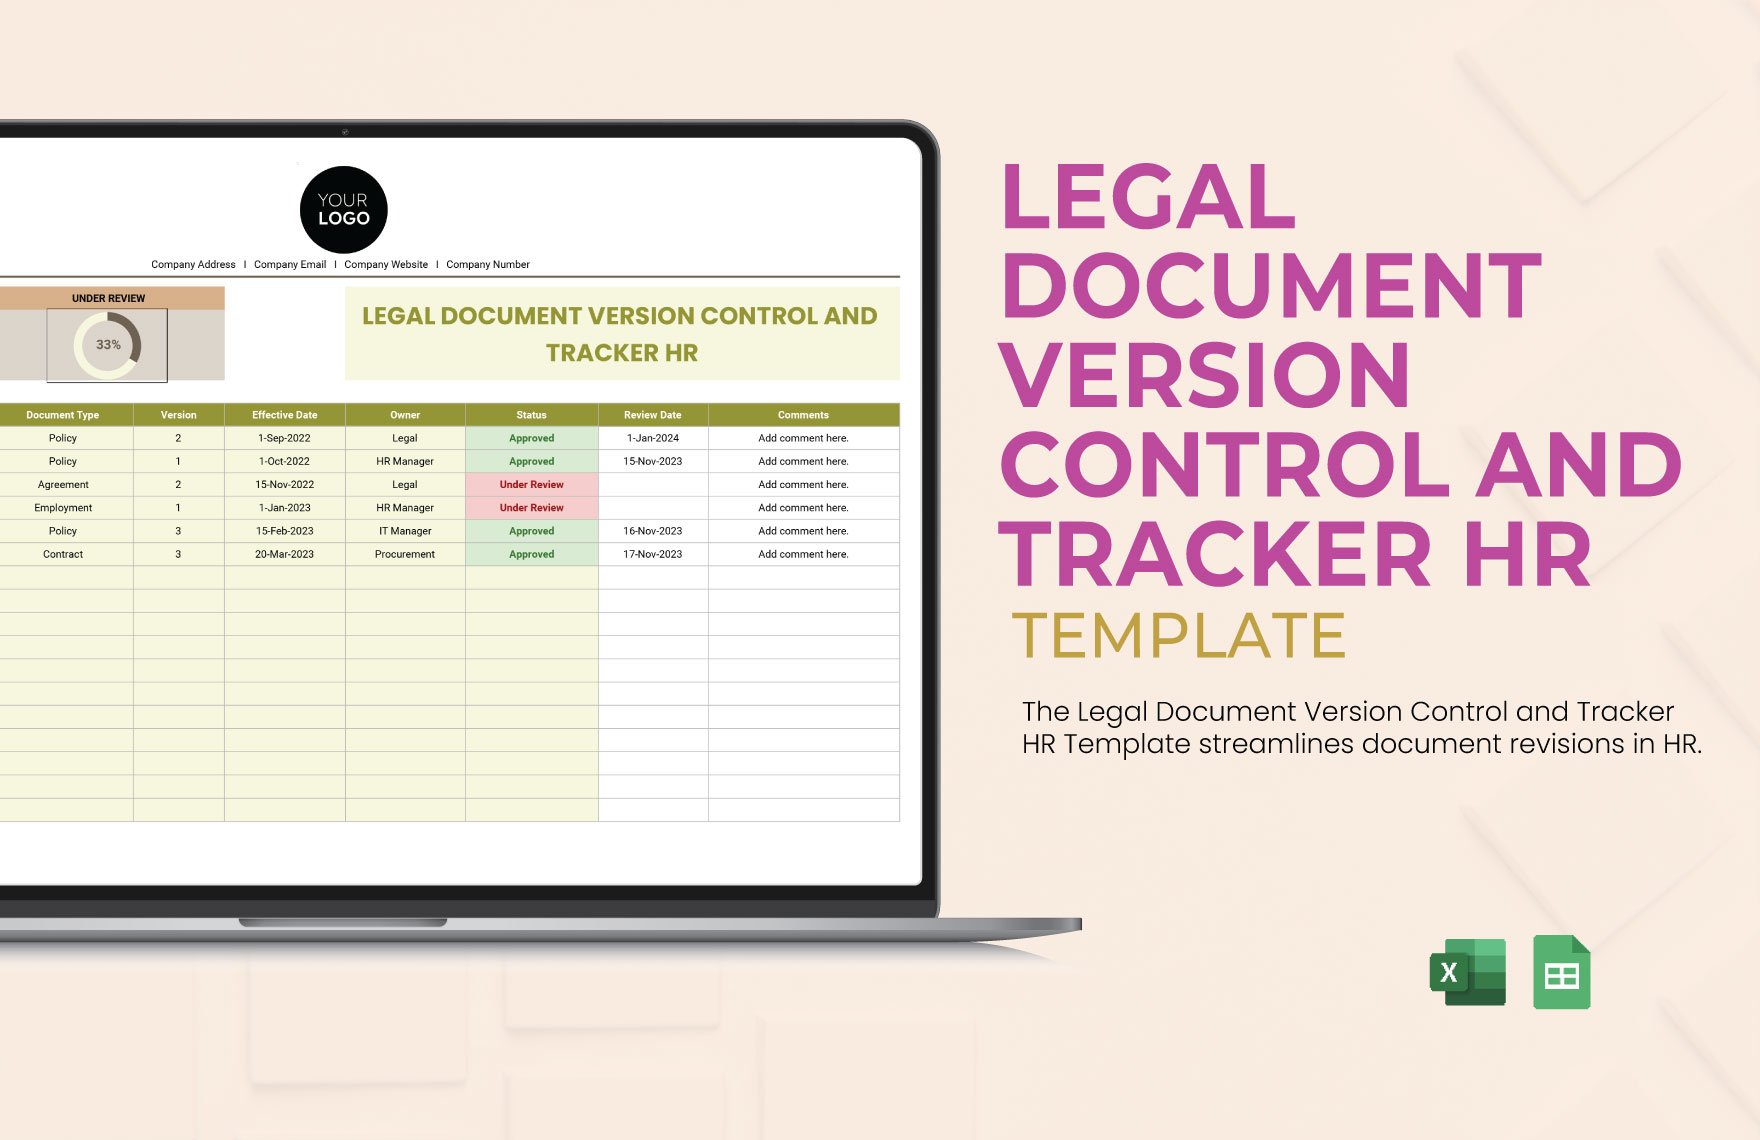 Legal Document Version Control and Tracker HR Template